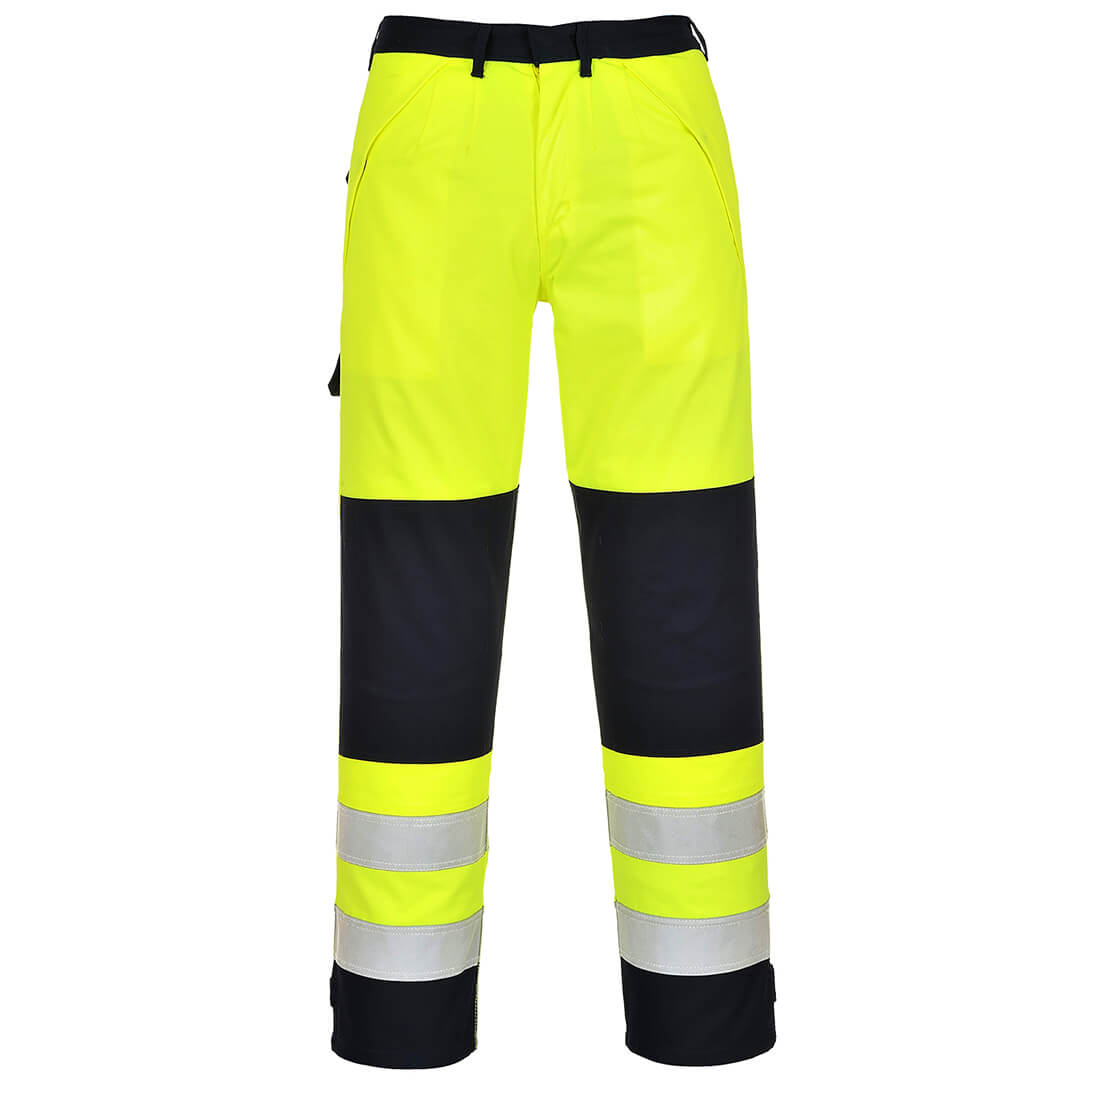 Photo of Biz Flame Hi Vis Multi-norm Flame Resistant Trousers Yellow / Navy Xl